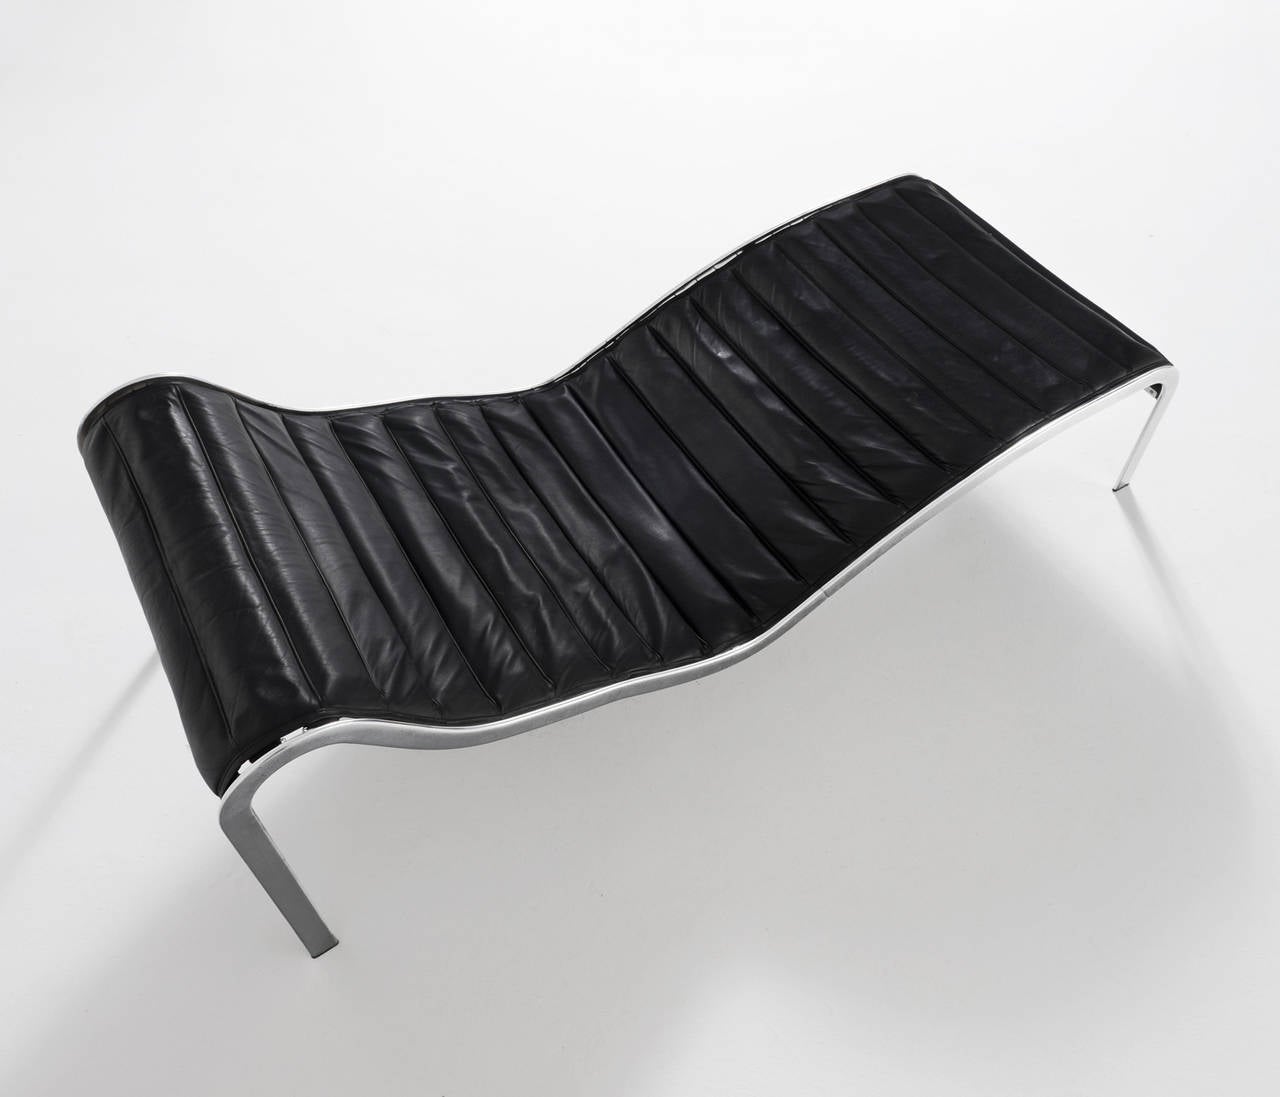 Mid-Century Modern Olivier Mourgue 'Whist Chaise' Chaise Longue in Black Leather